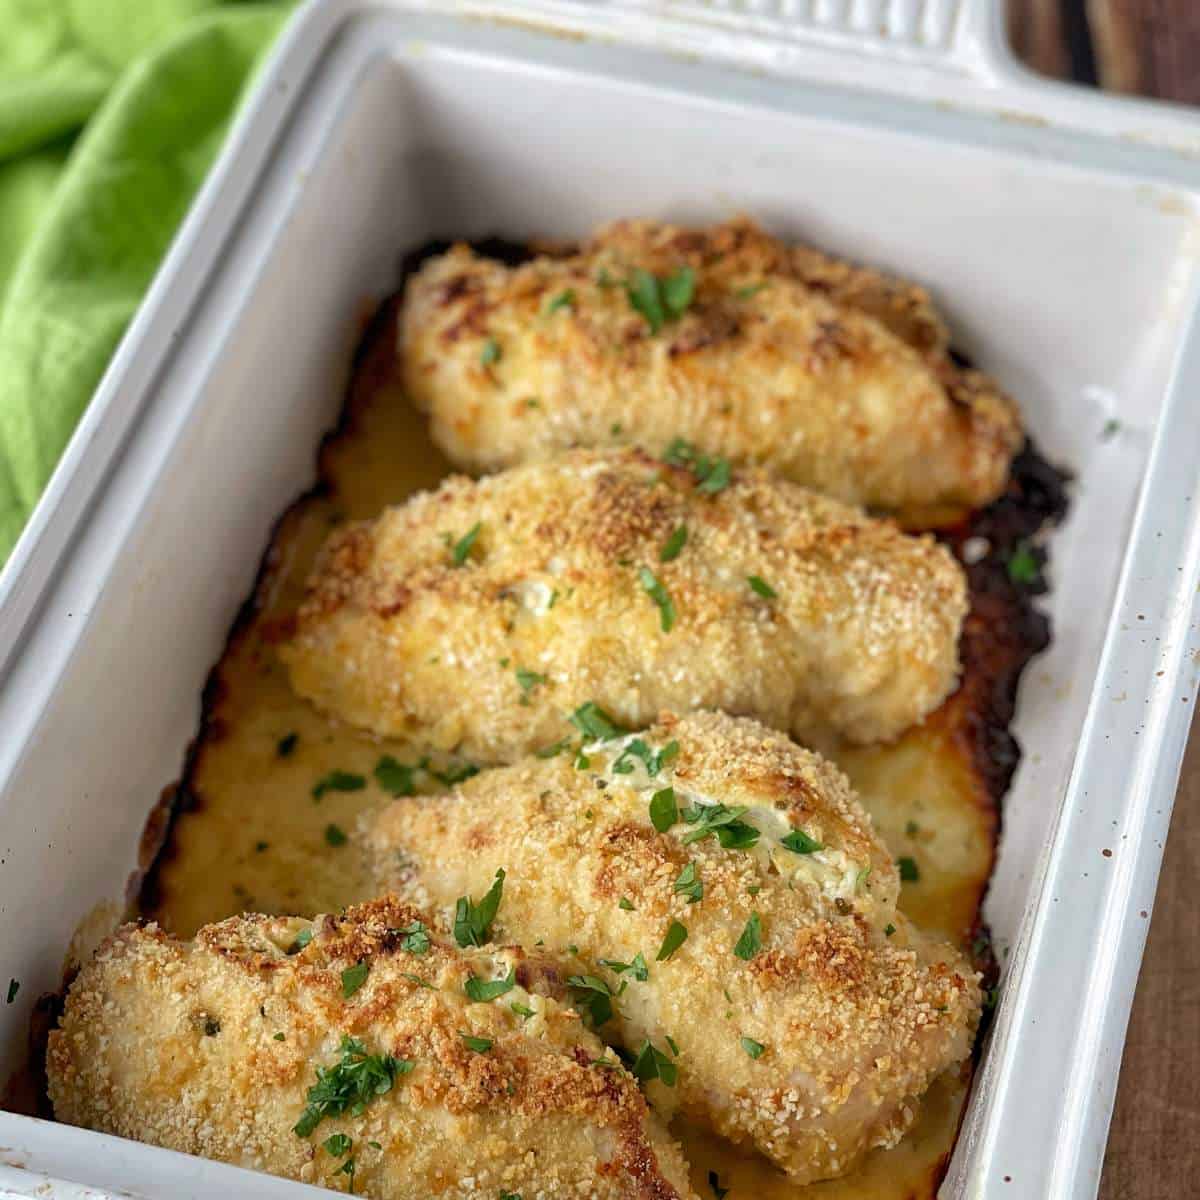 4 cooked, crumbed chicken breasts in a roasting dish.